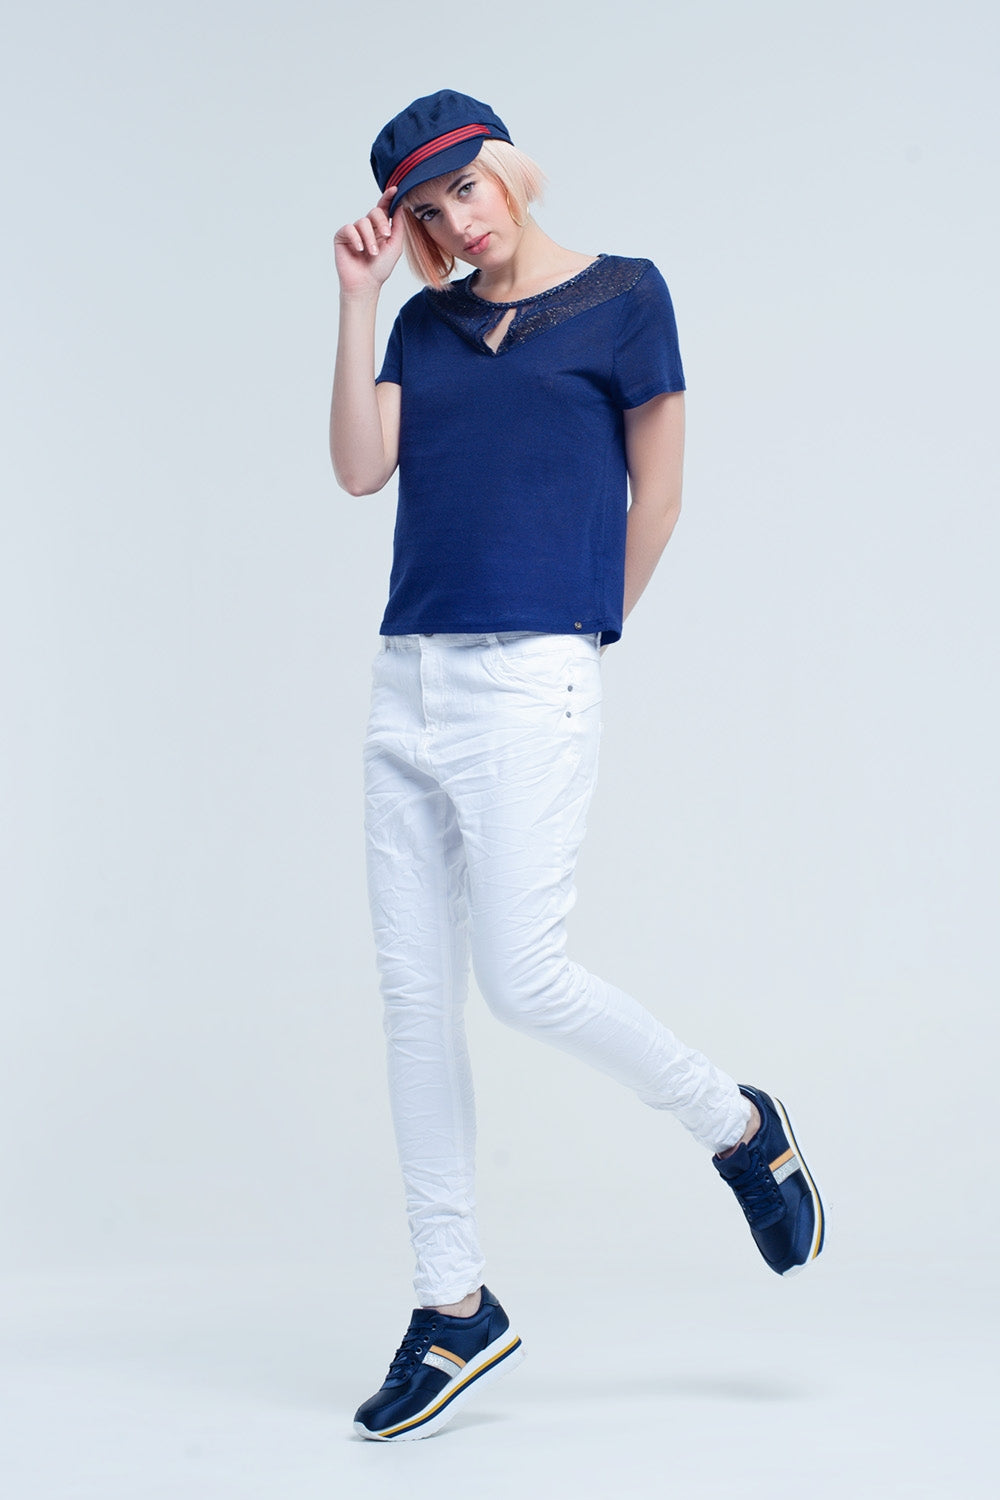 Crumpled white jeans with pockets Szua Store